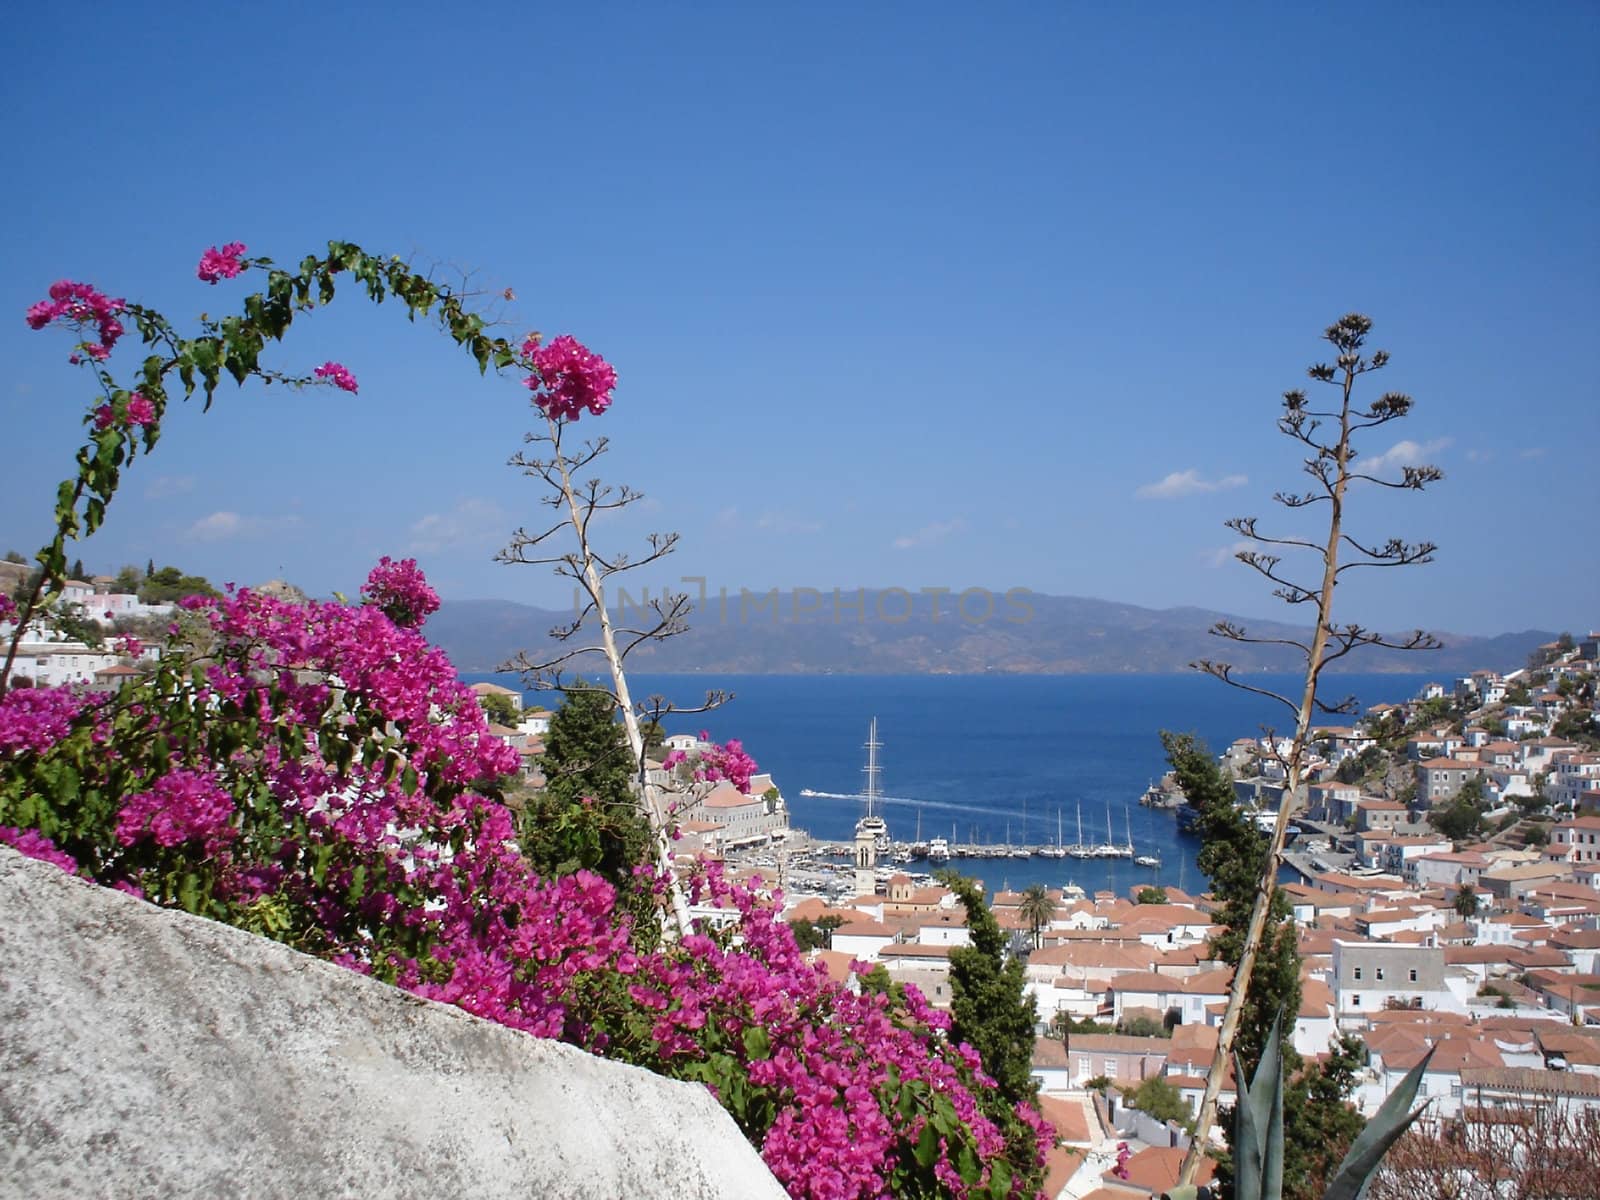 Hydra view from the hill by mulden